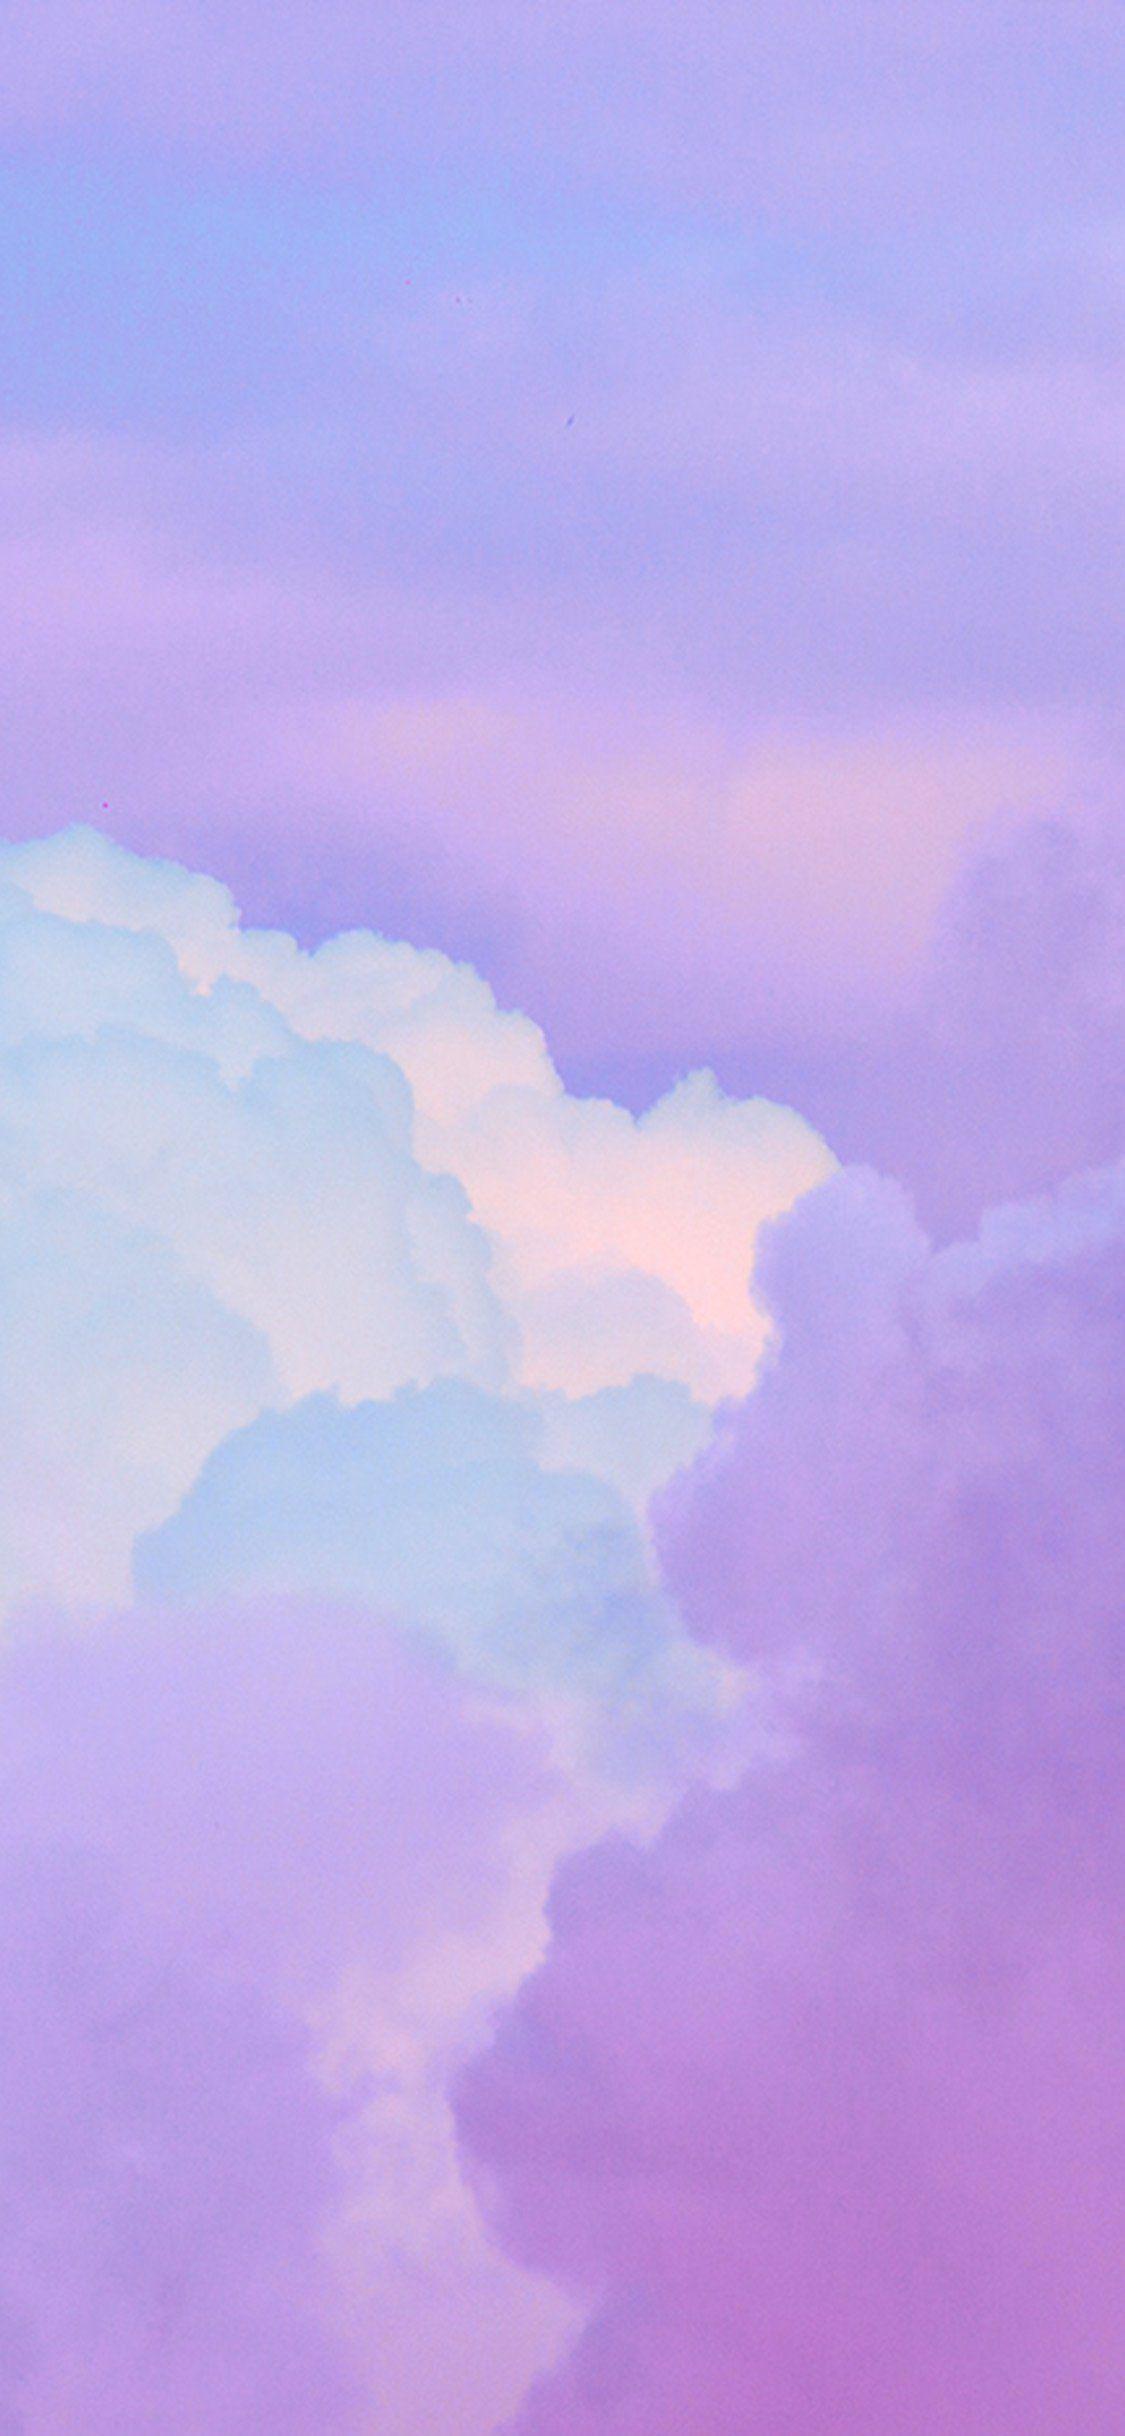 Wallpaper Iphone Aesthetic Cloud Total Update Discover all images by dex. wallpaper iphone aesthetic cloud